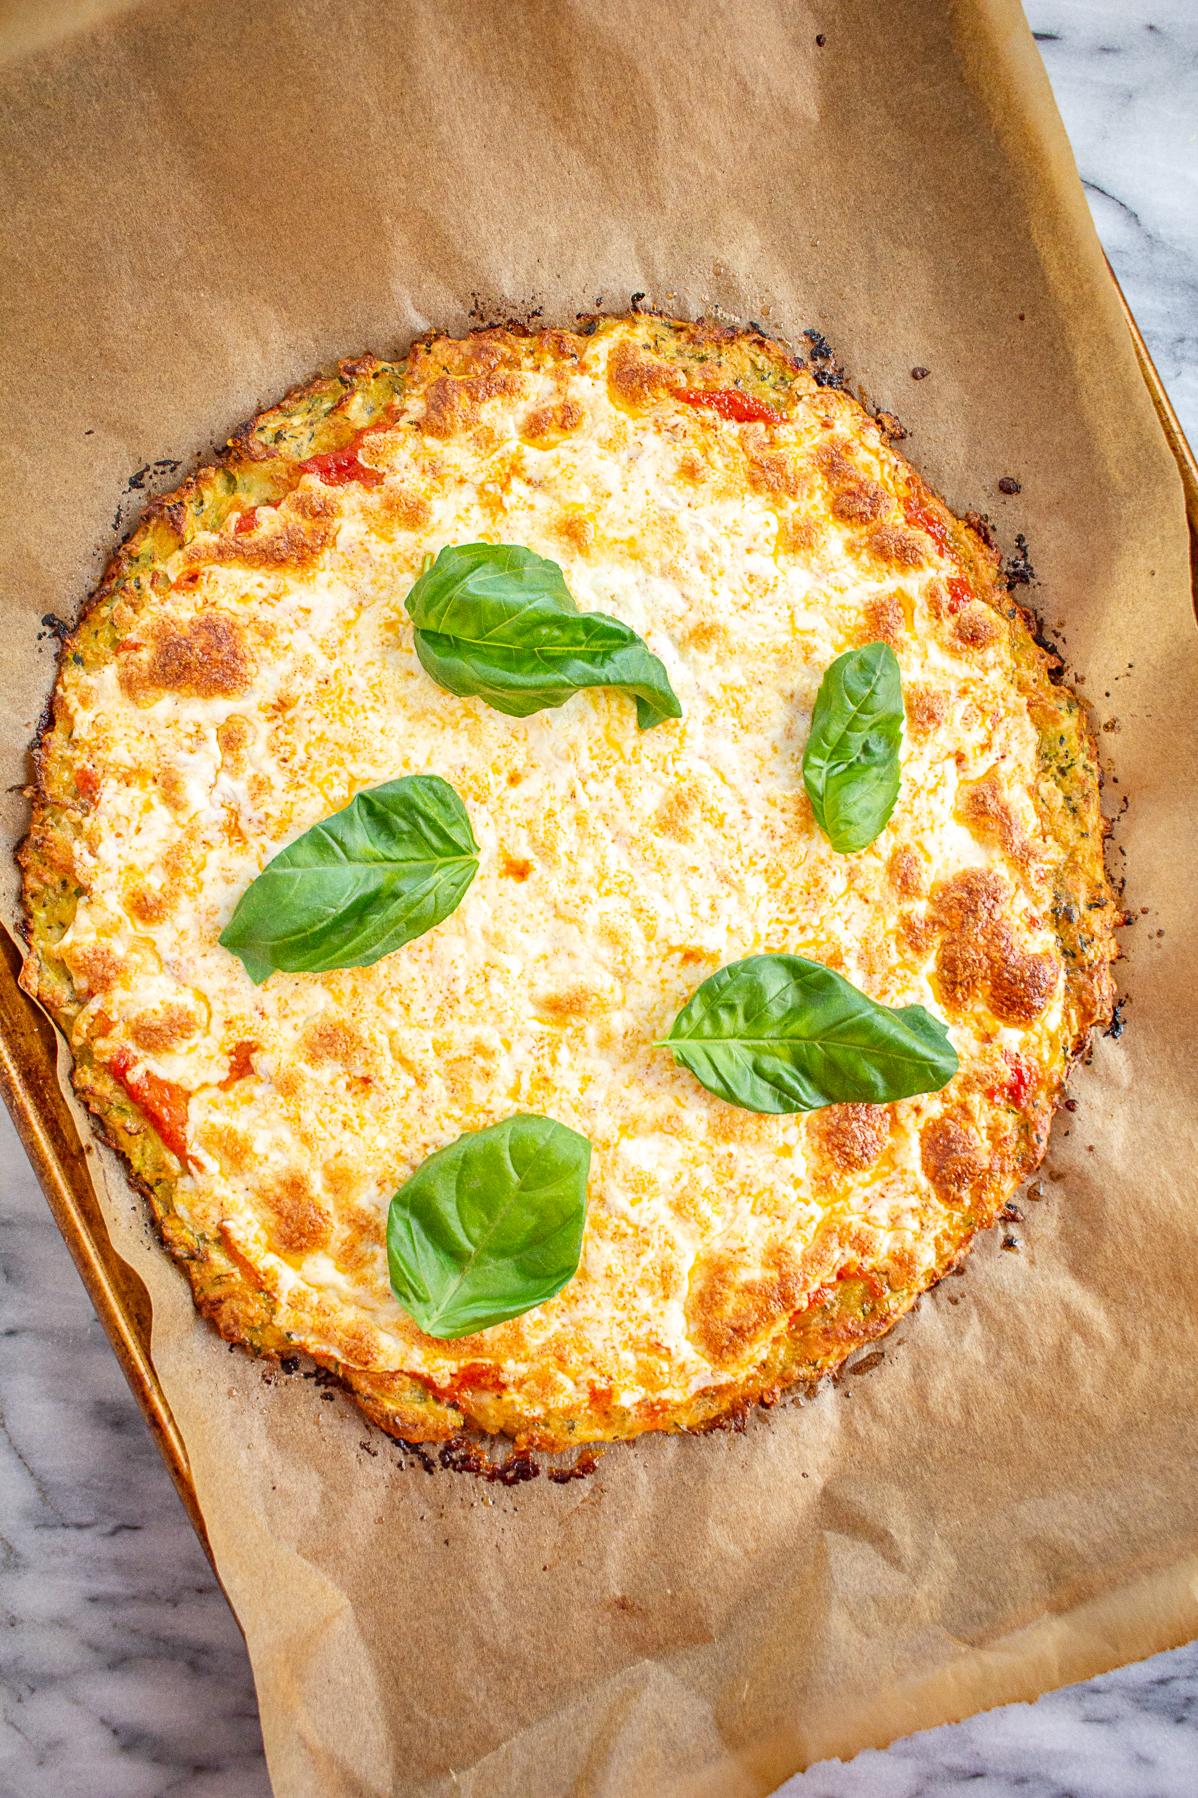  Pizza night just got a whole lot healthier with this zucchini-based crust recipe.